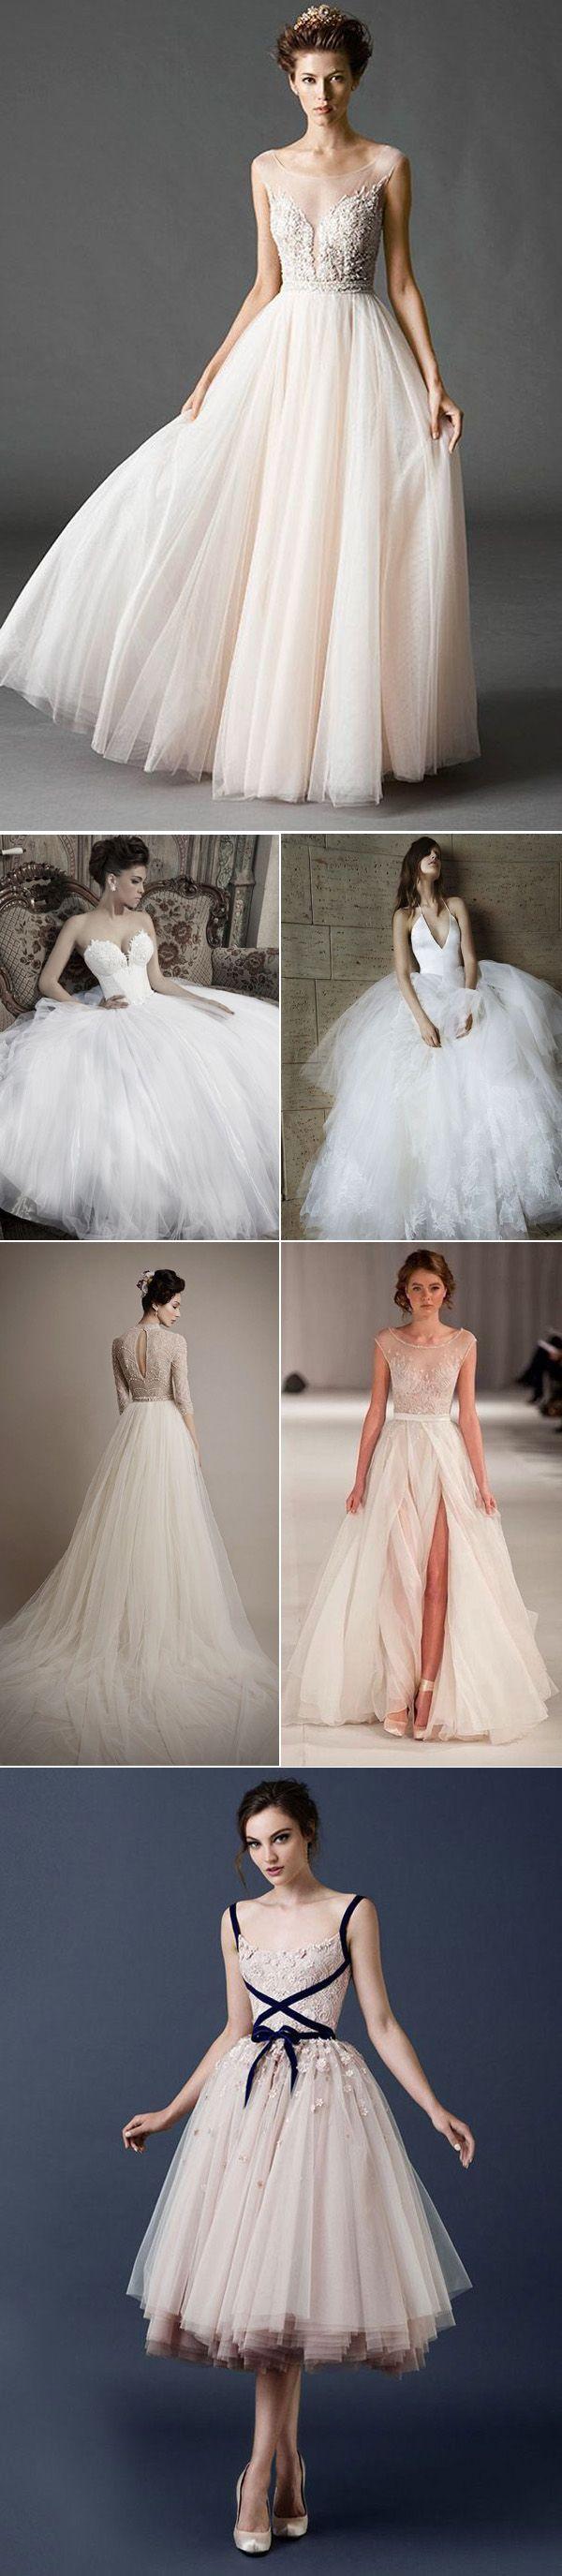 Mariage - Top 9 Trends For Wedding Dresses 2015